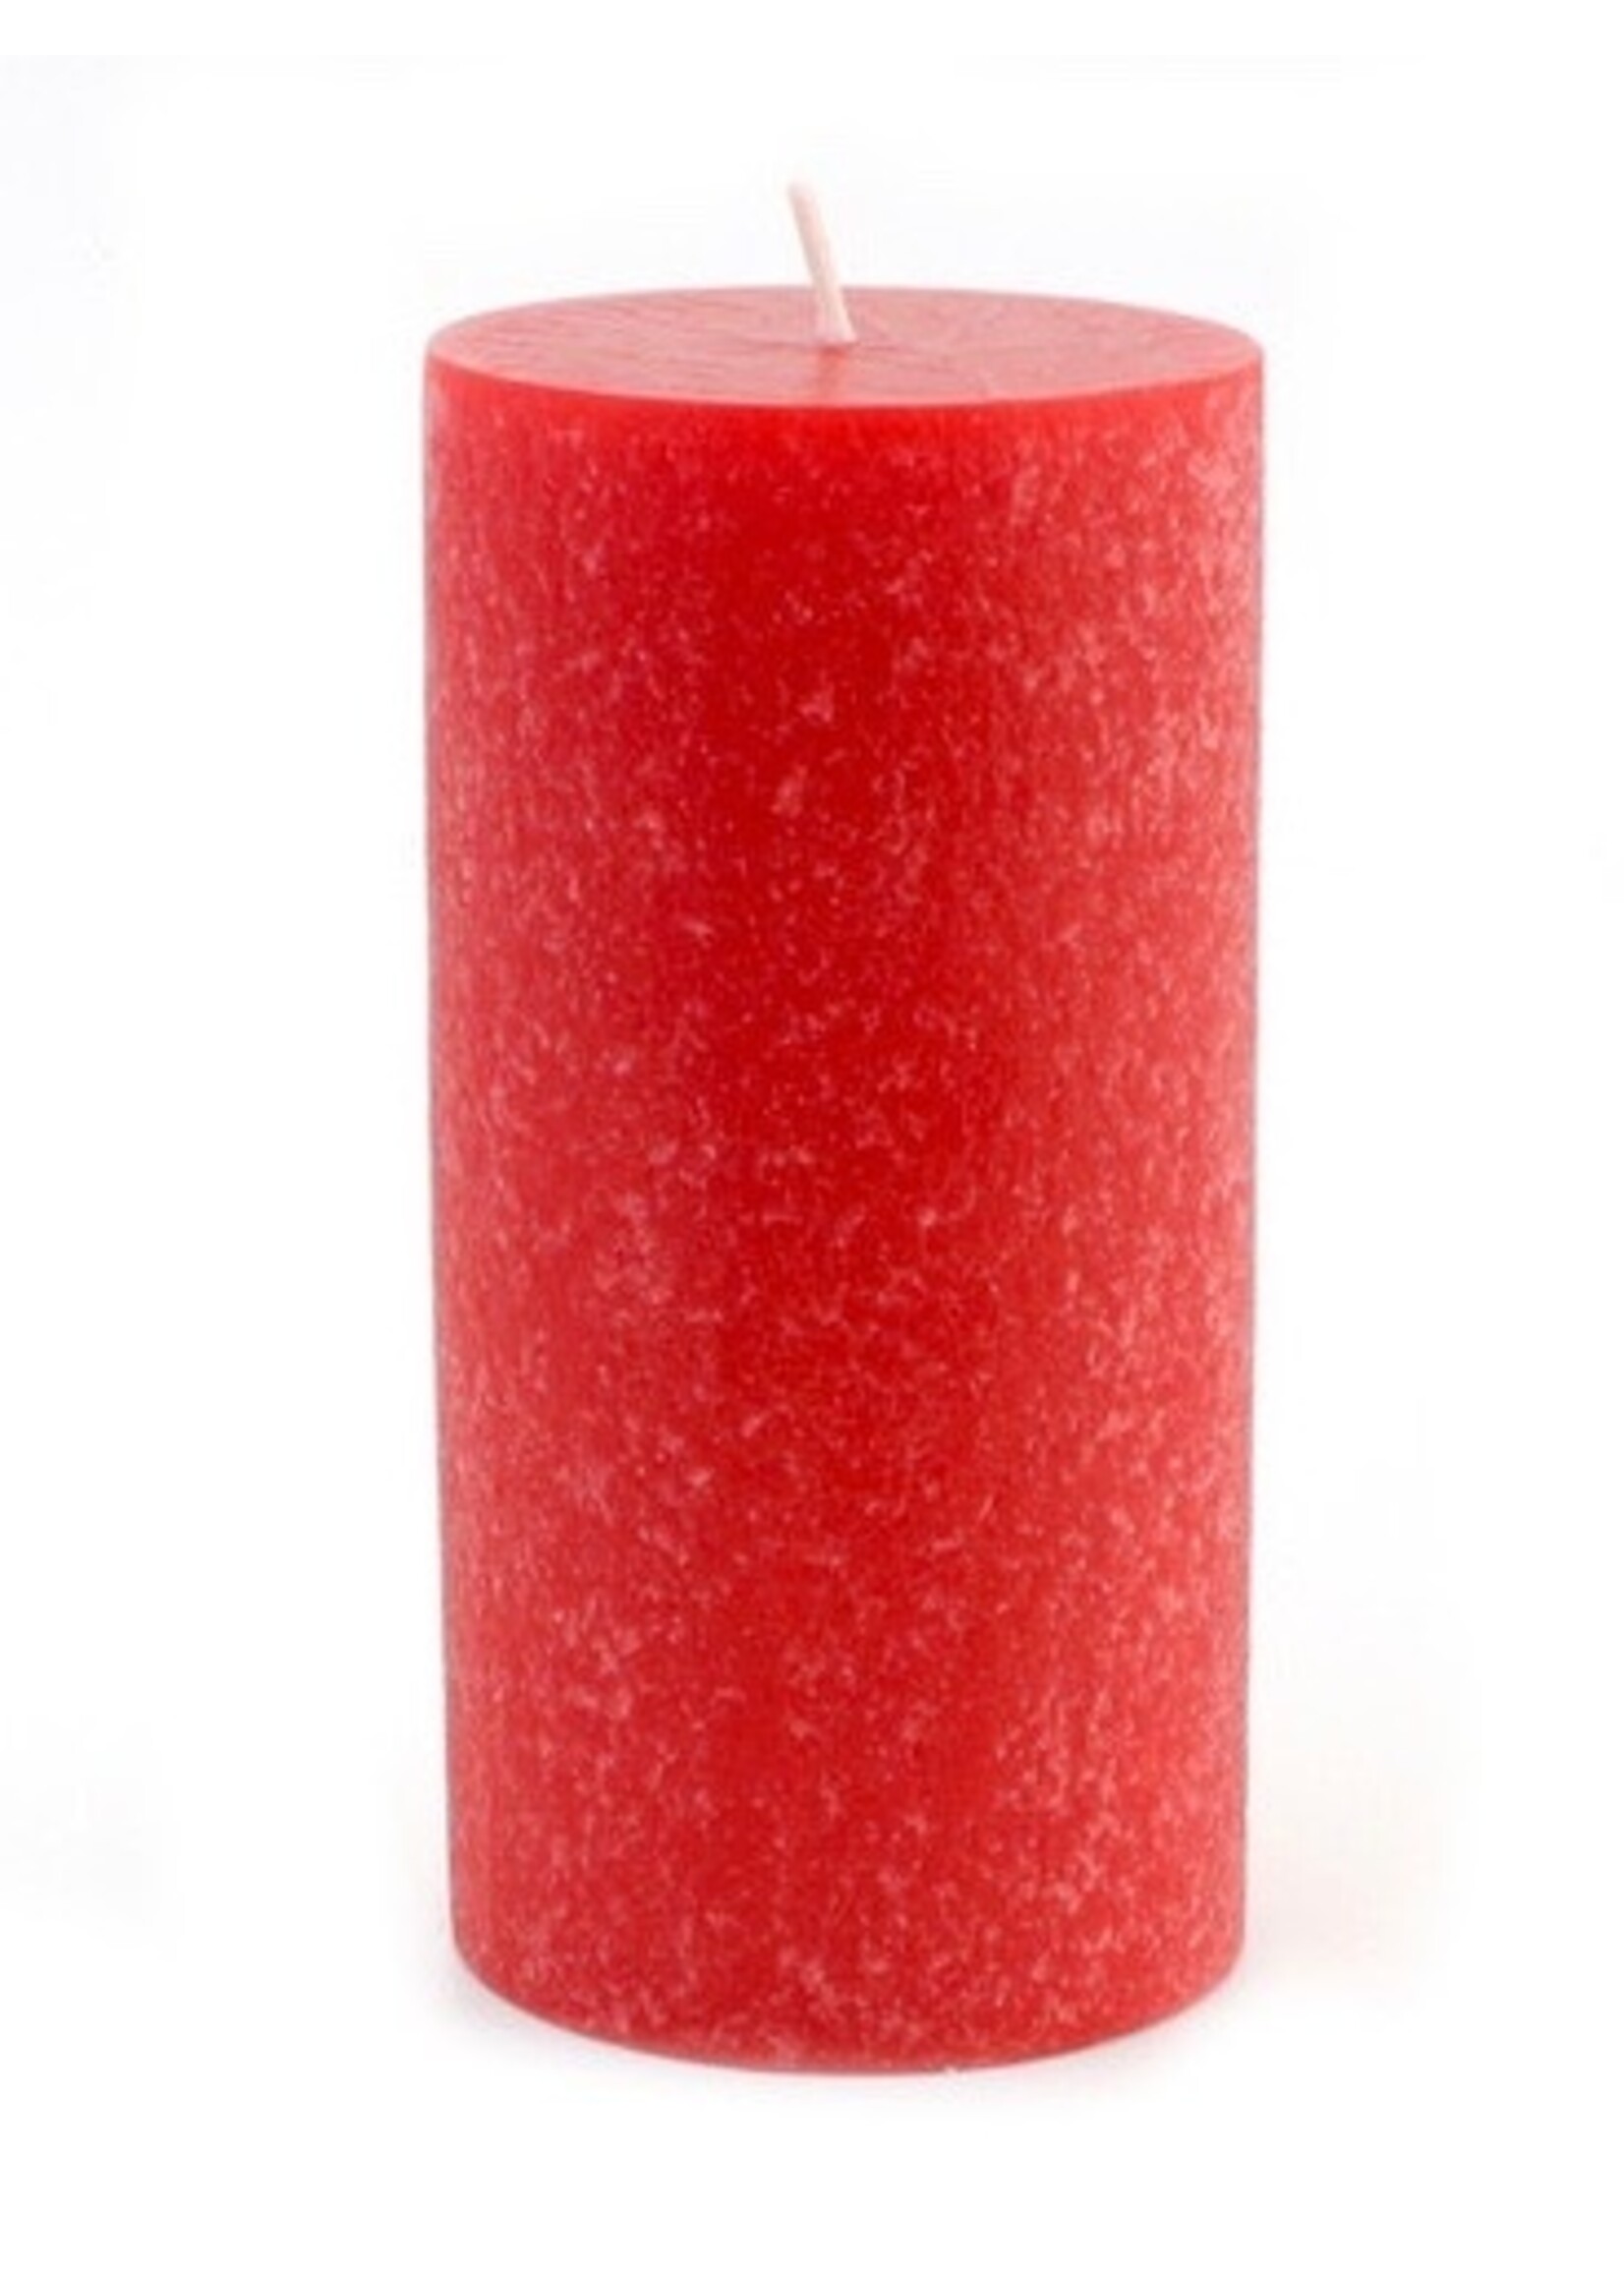 Root Candles Unscented pillar candles 6" "Timberline" by Root Candles